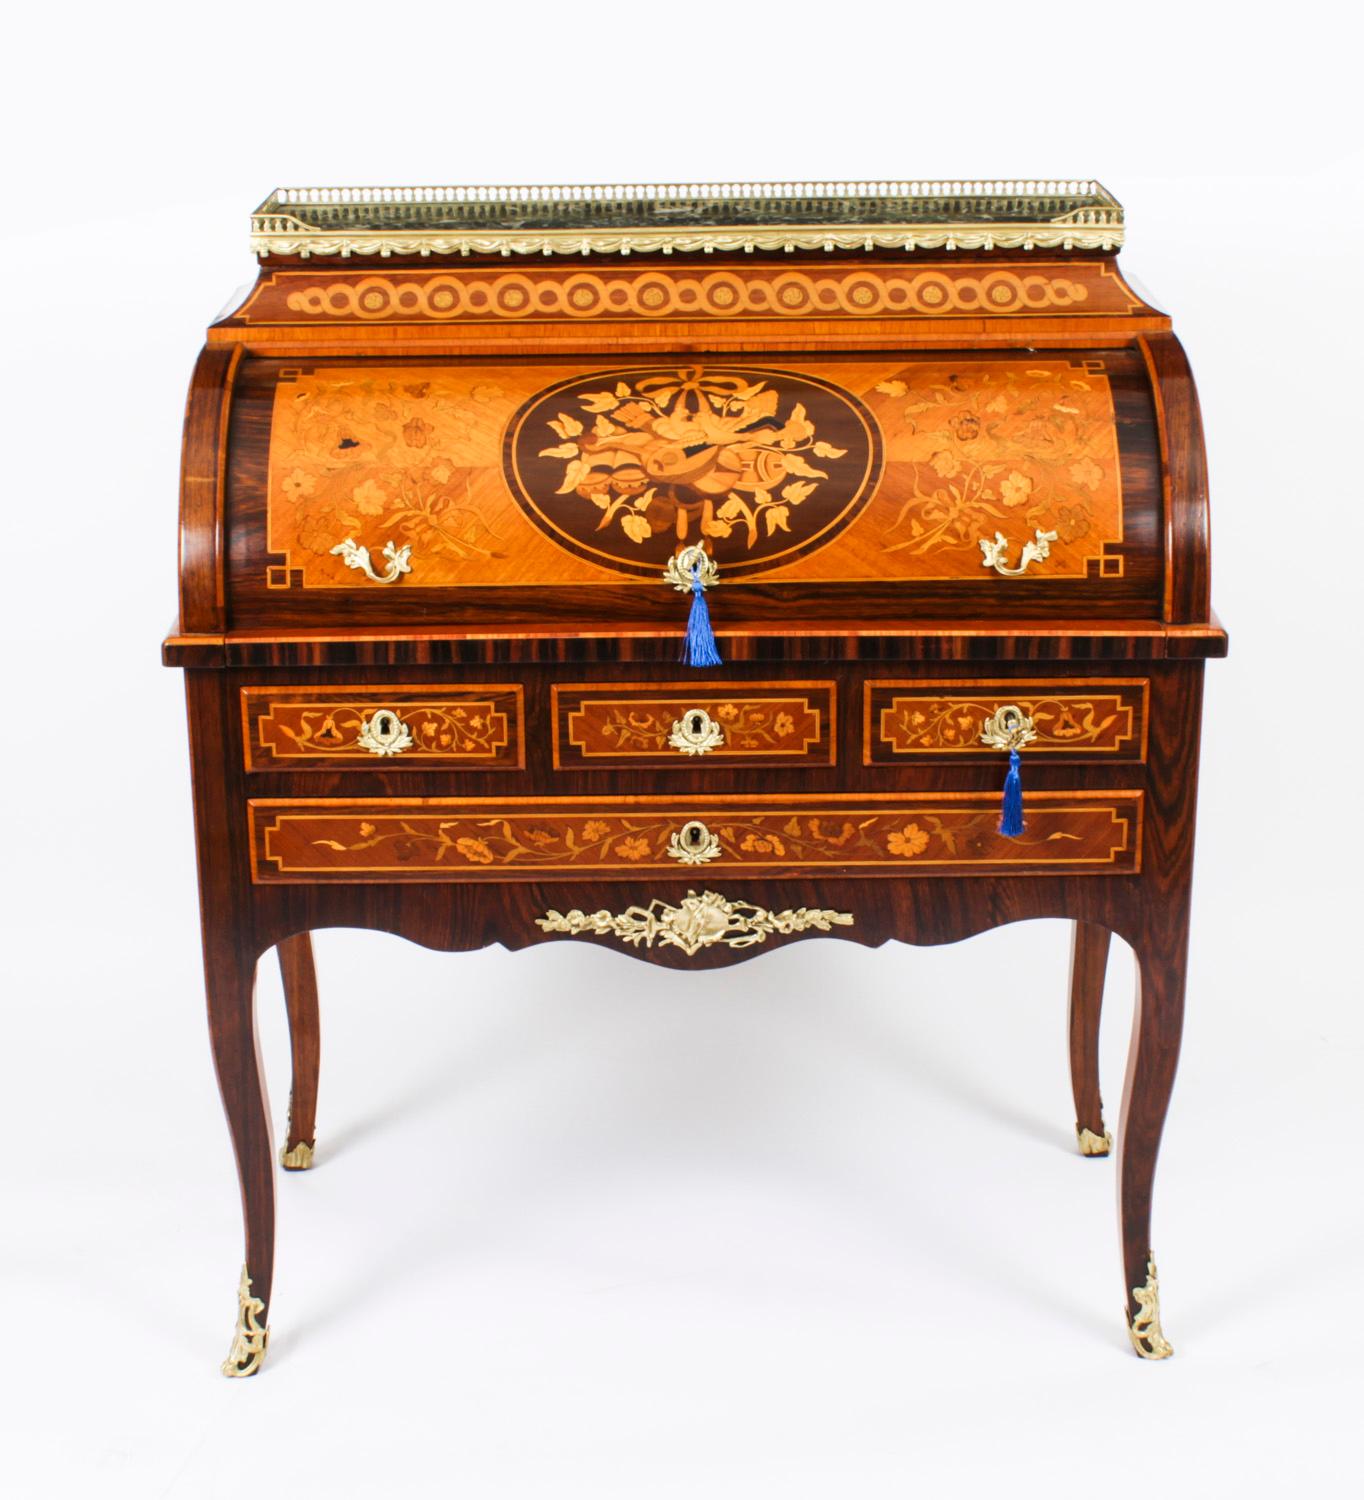 This is a gorgeous antique French goncalo alves & walnut marquetry Louis Revival secretaire a cylindre, circa 1830 in date.

It is decorated throughout with beautiful floral marquetry with trophies, lovebirds, ribbons and flowering stems, the